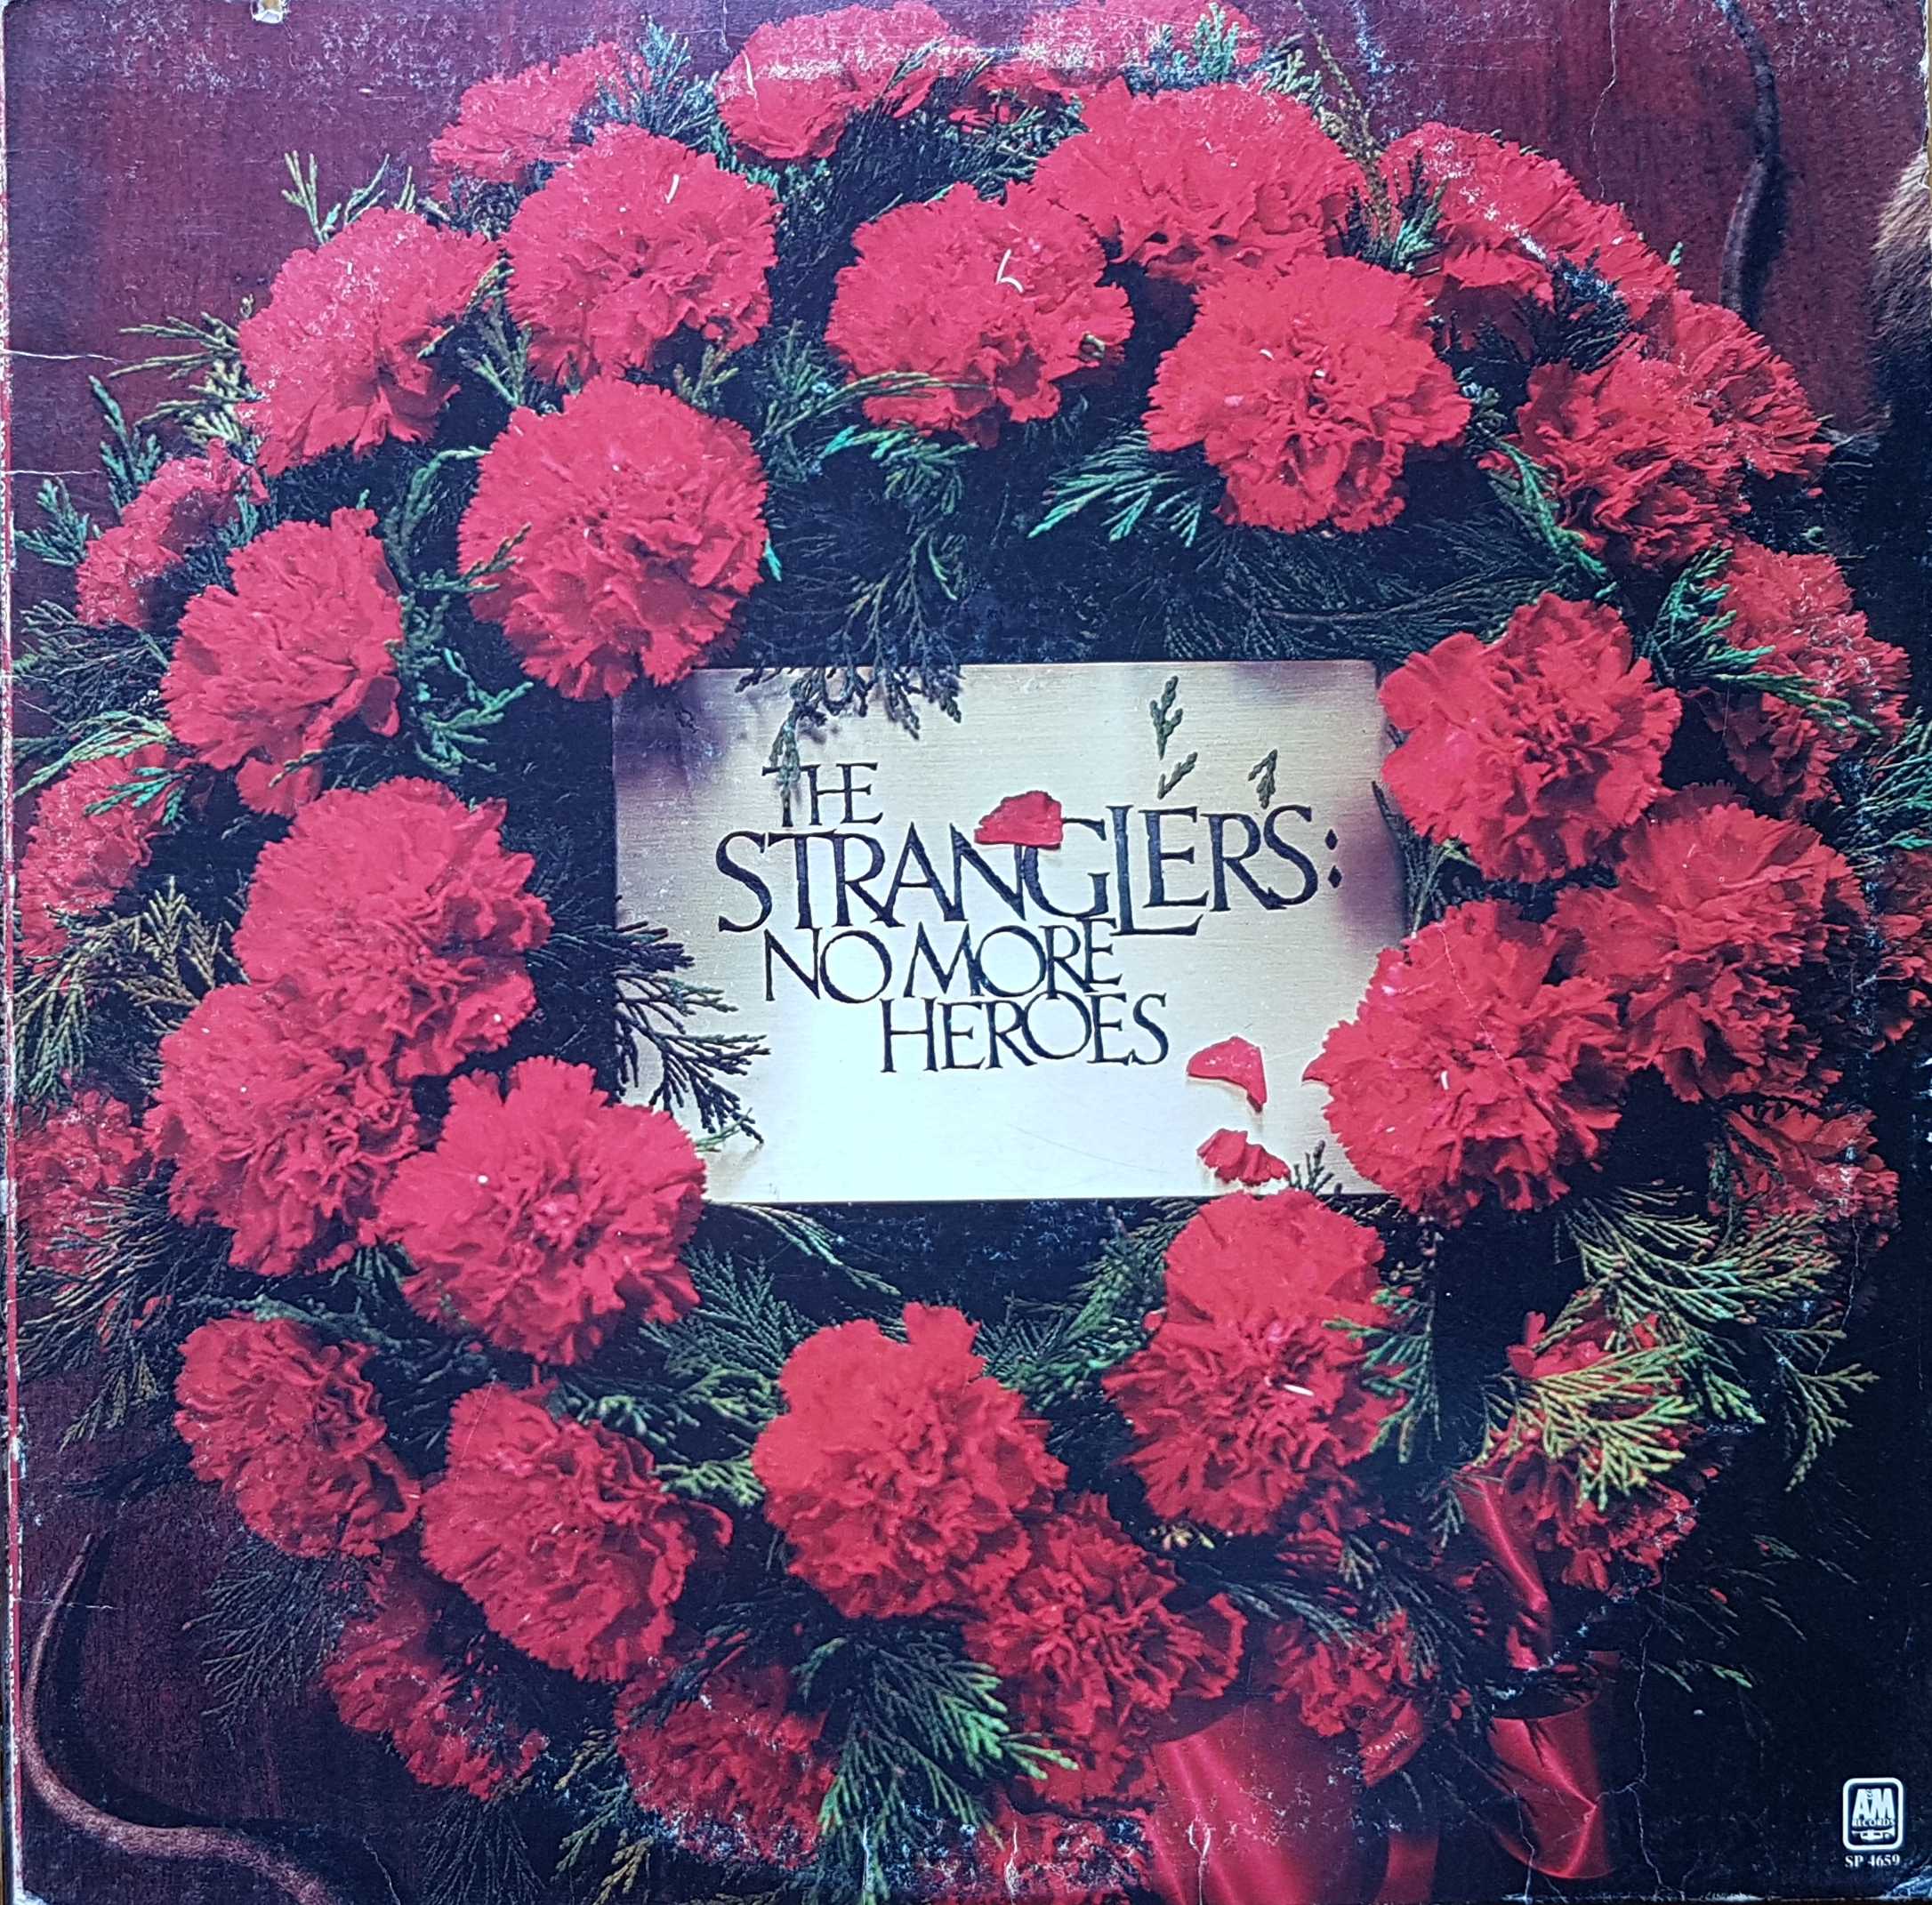 Picture of UAL 24070 No more heroes by artist The Stranglers from The Stranglers